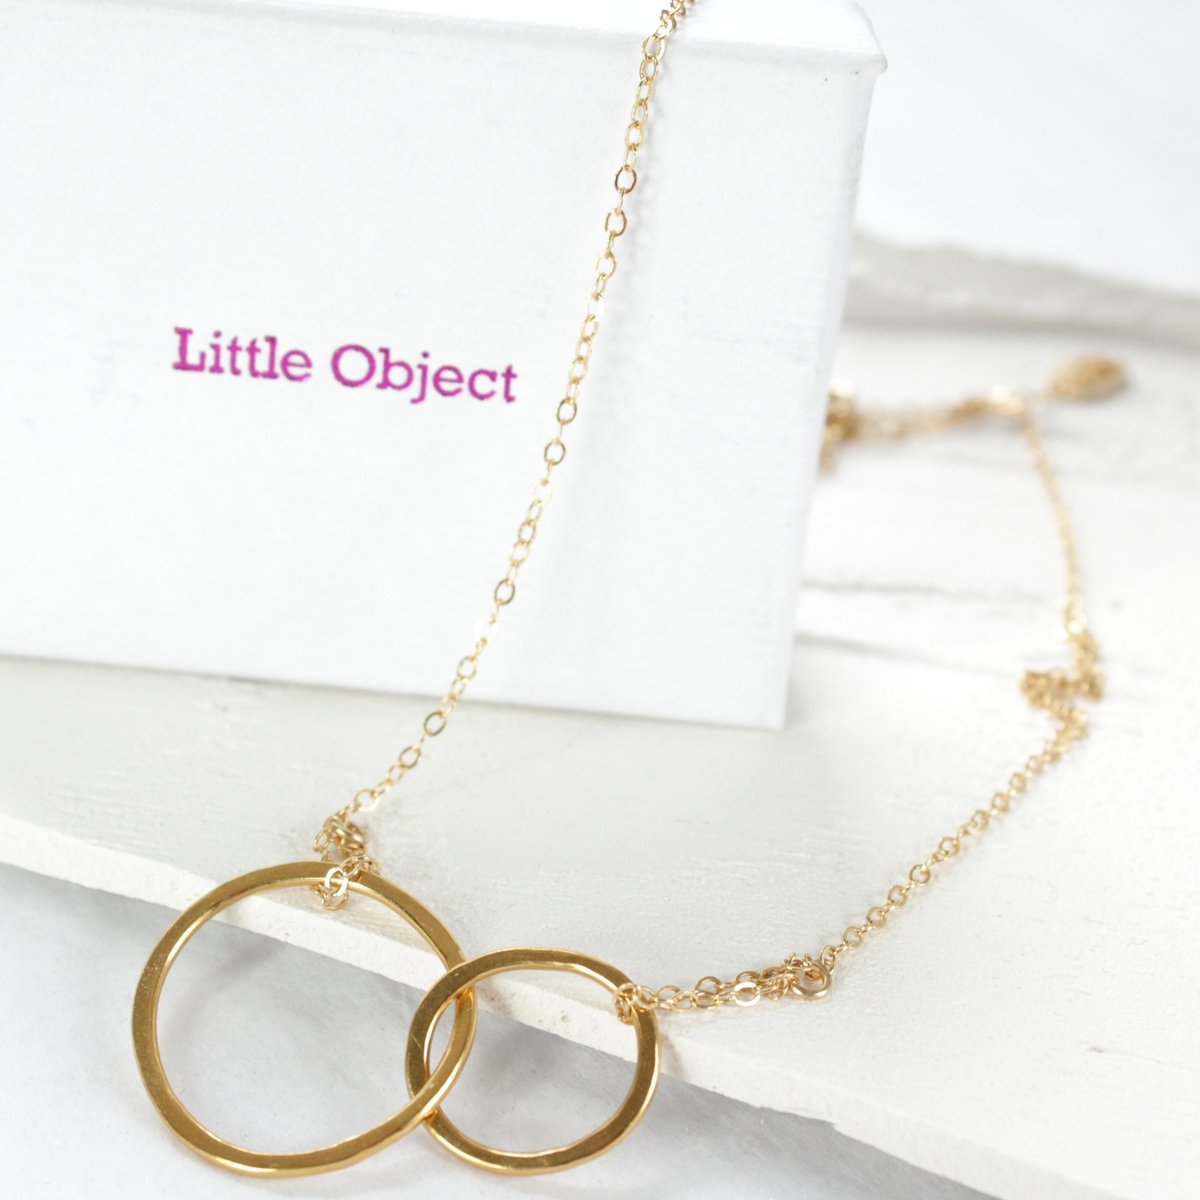 Image of Interlocking loops gold necklace